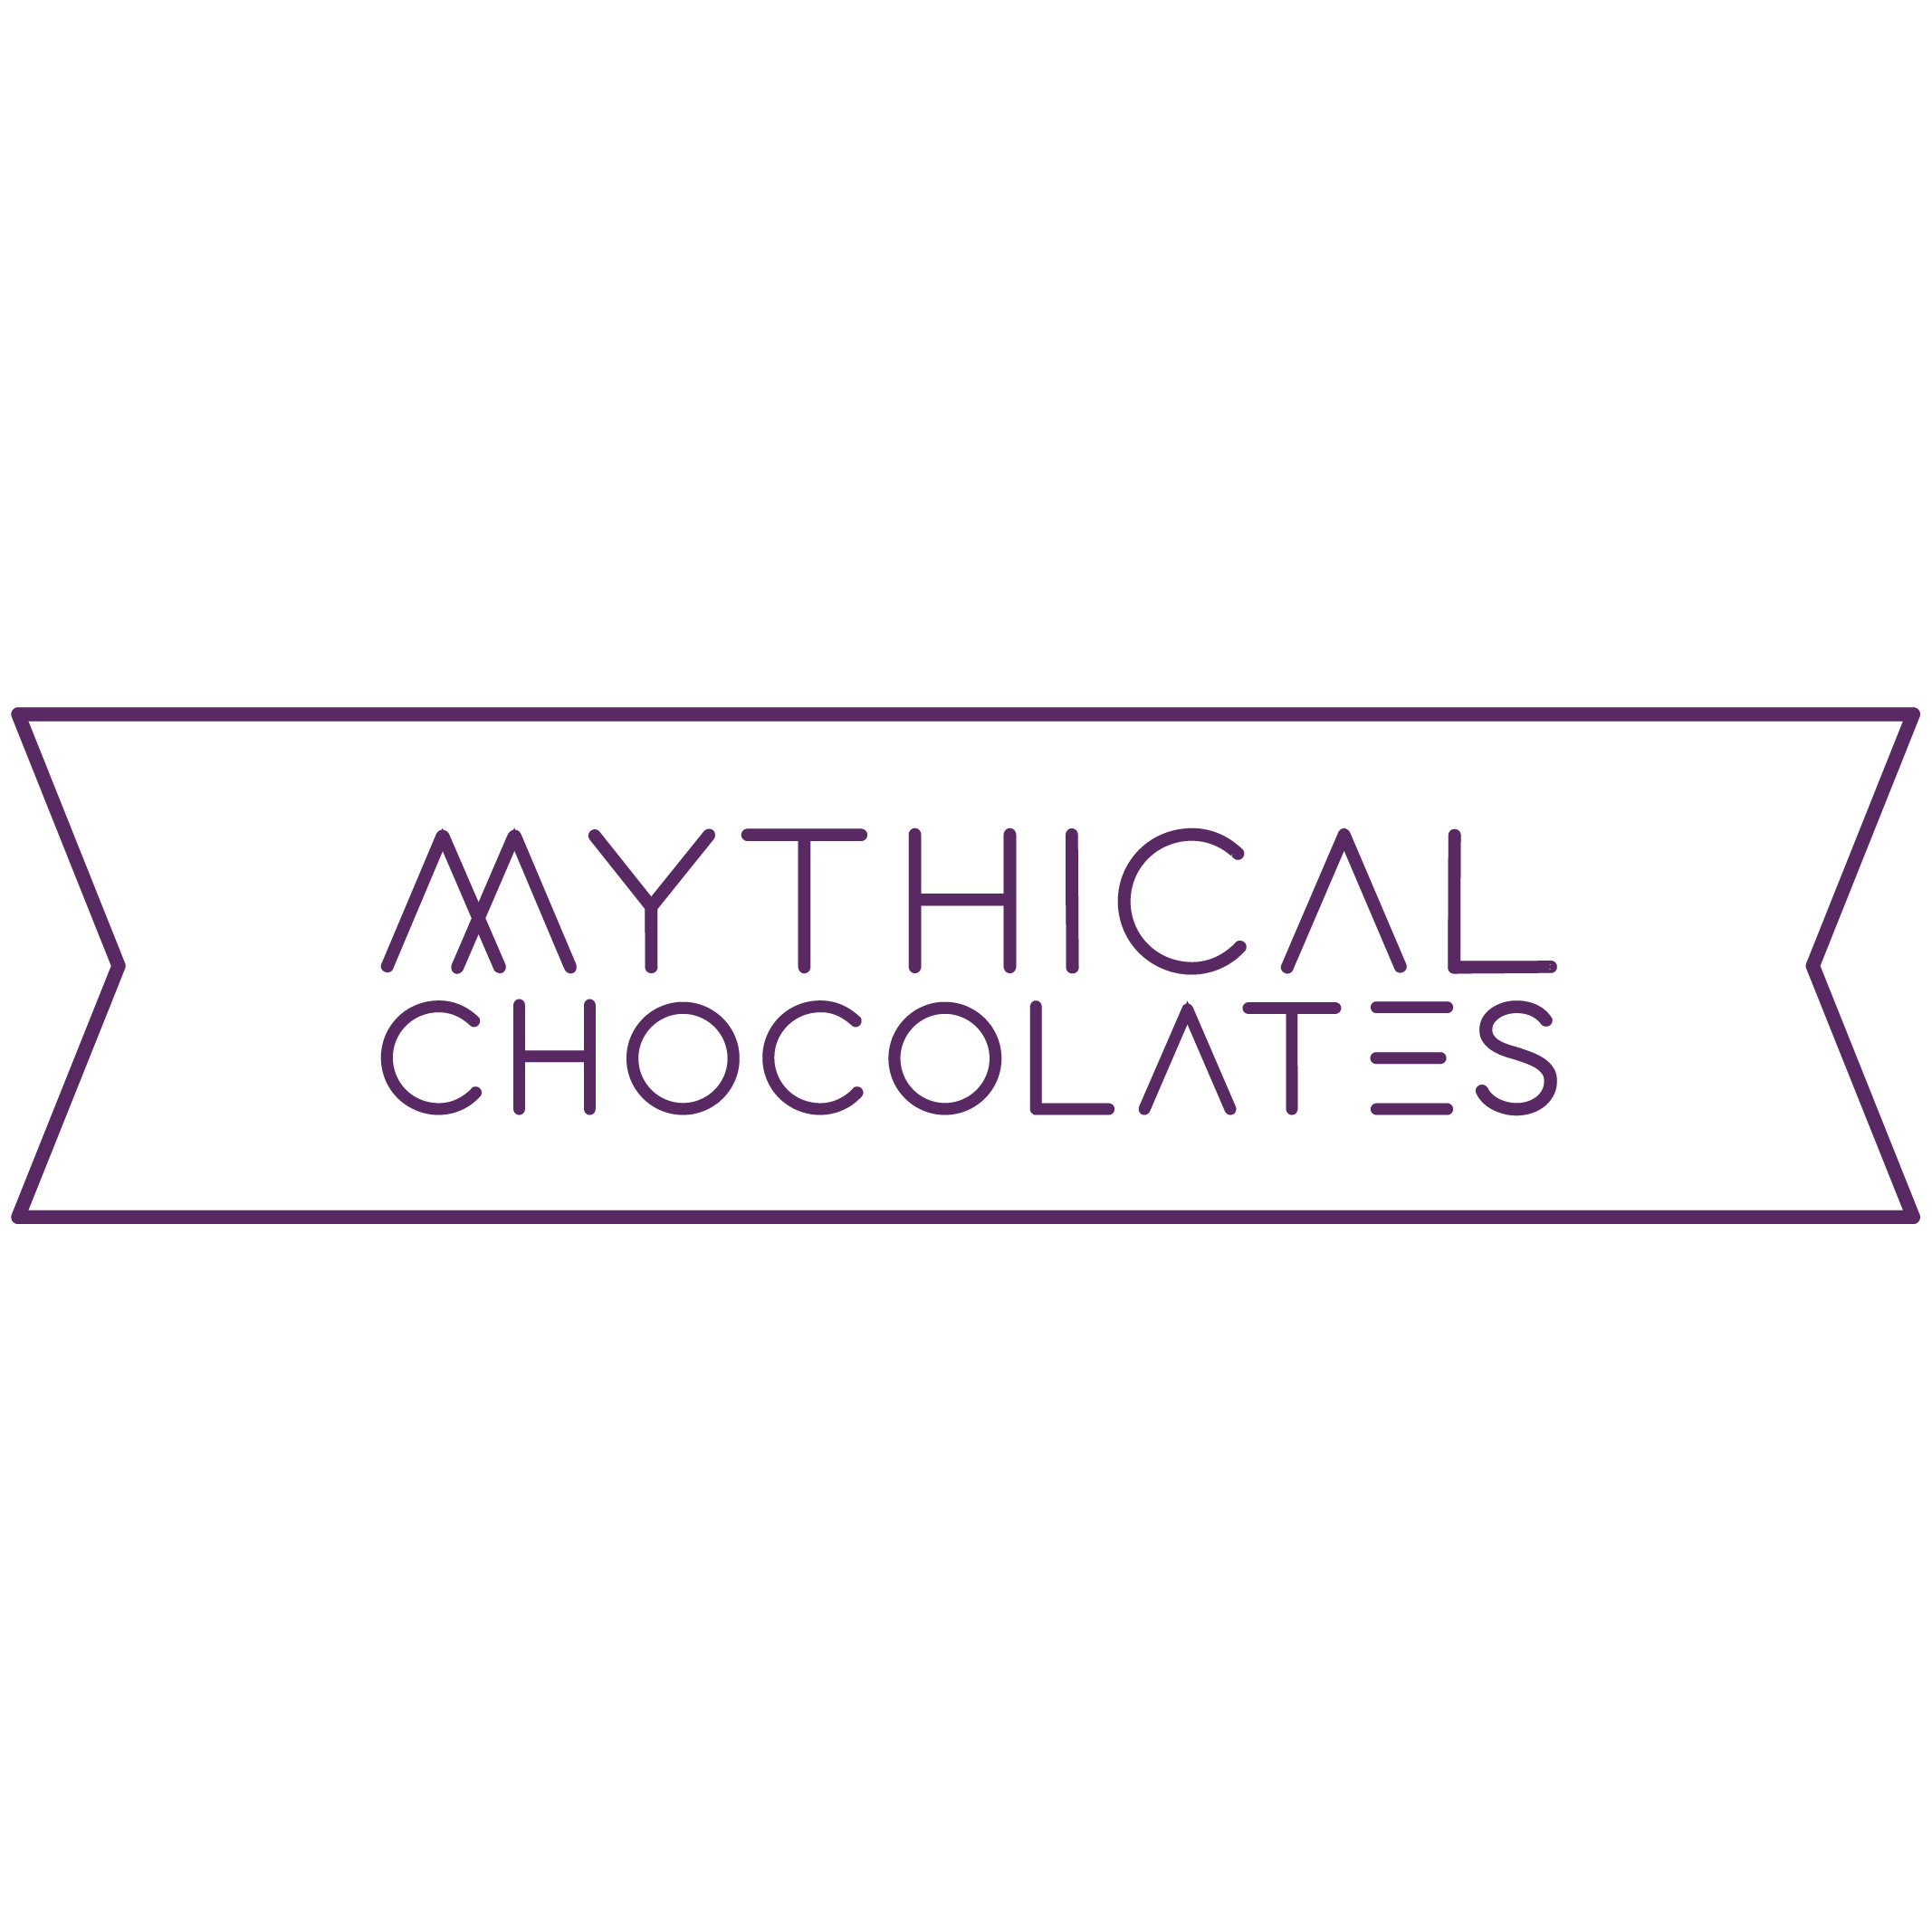 Mythical Chocolate Logo. Stone-ground dark chocolate, hand crafted in Bend, Oregon. All organic ingredients and direct-trade cacao. Open your heart with organic, gluten-free, dairy-free, and vegan chocolate.